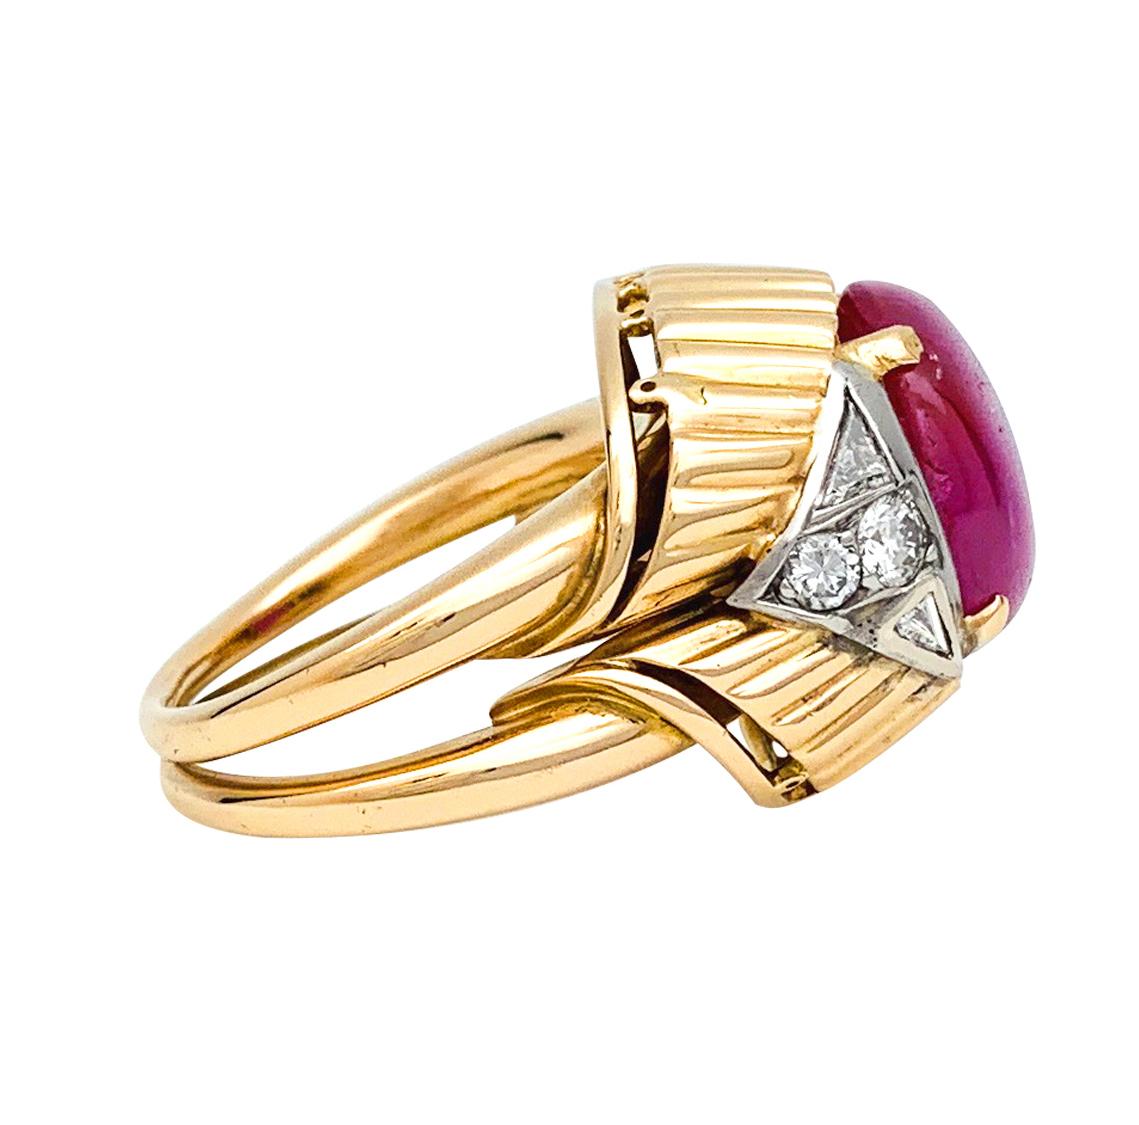 A 18Kt yellow gold and platinum ring, centered with an about 6,40 carats ruby cabochon, framed by four triangular diamonds and four brilliant cut diamonds. 
French gemological Laboratory certificate stating that the stone is from Birmanie, unheated